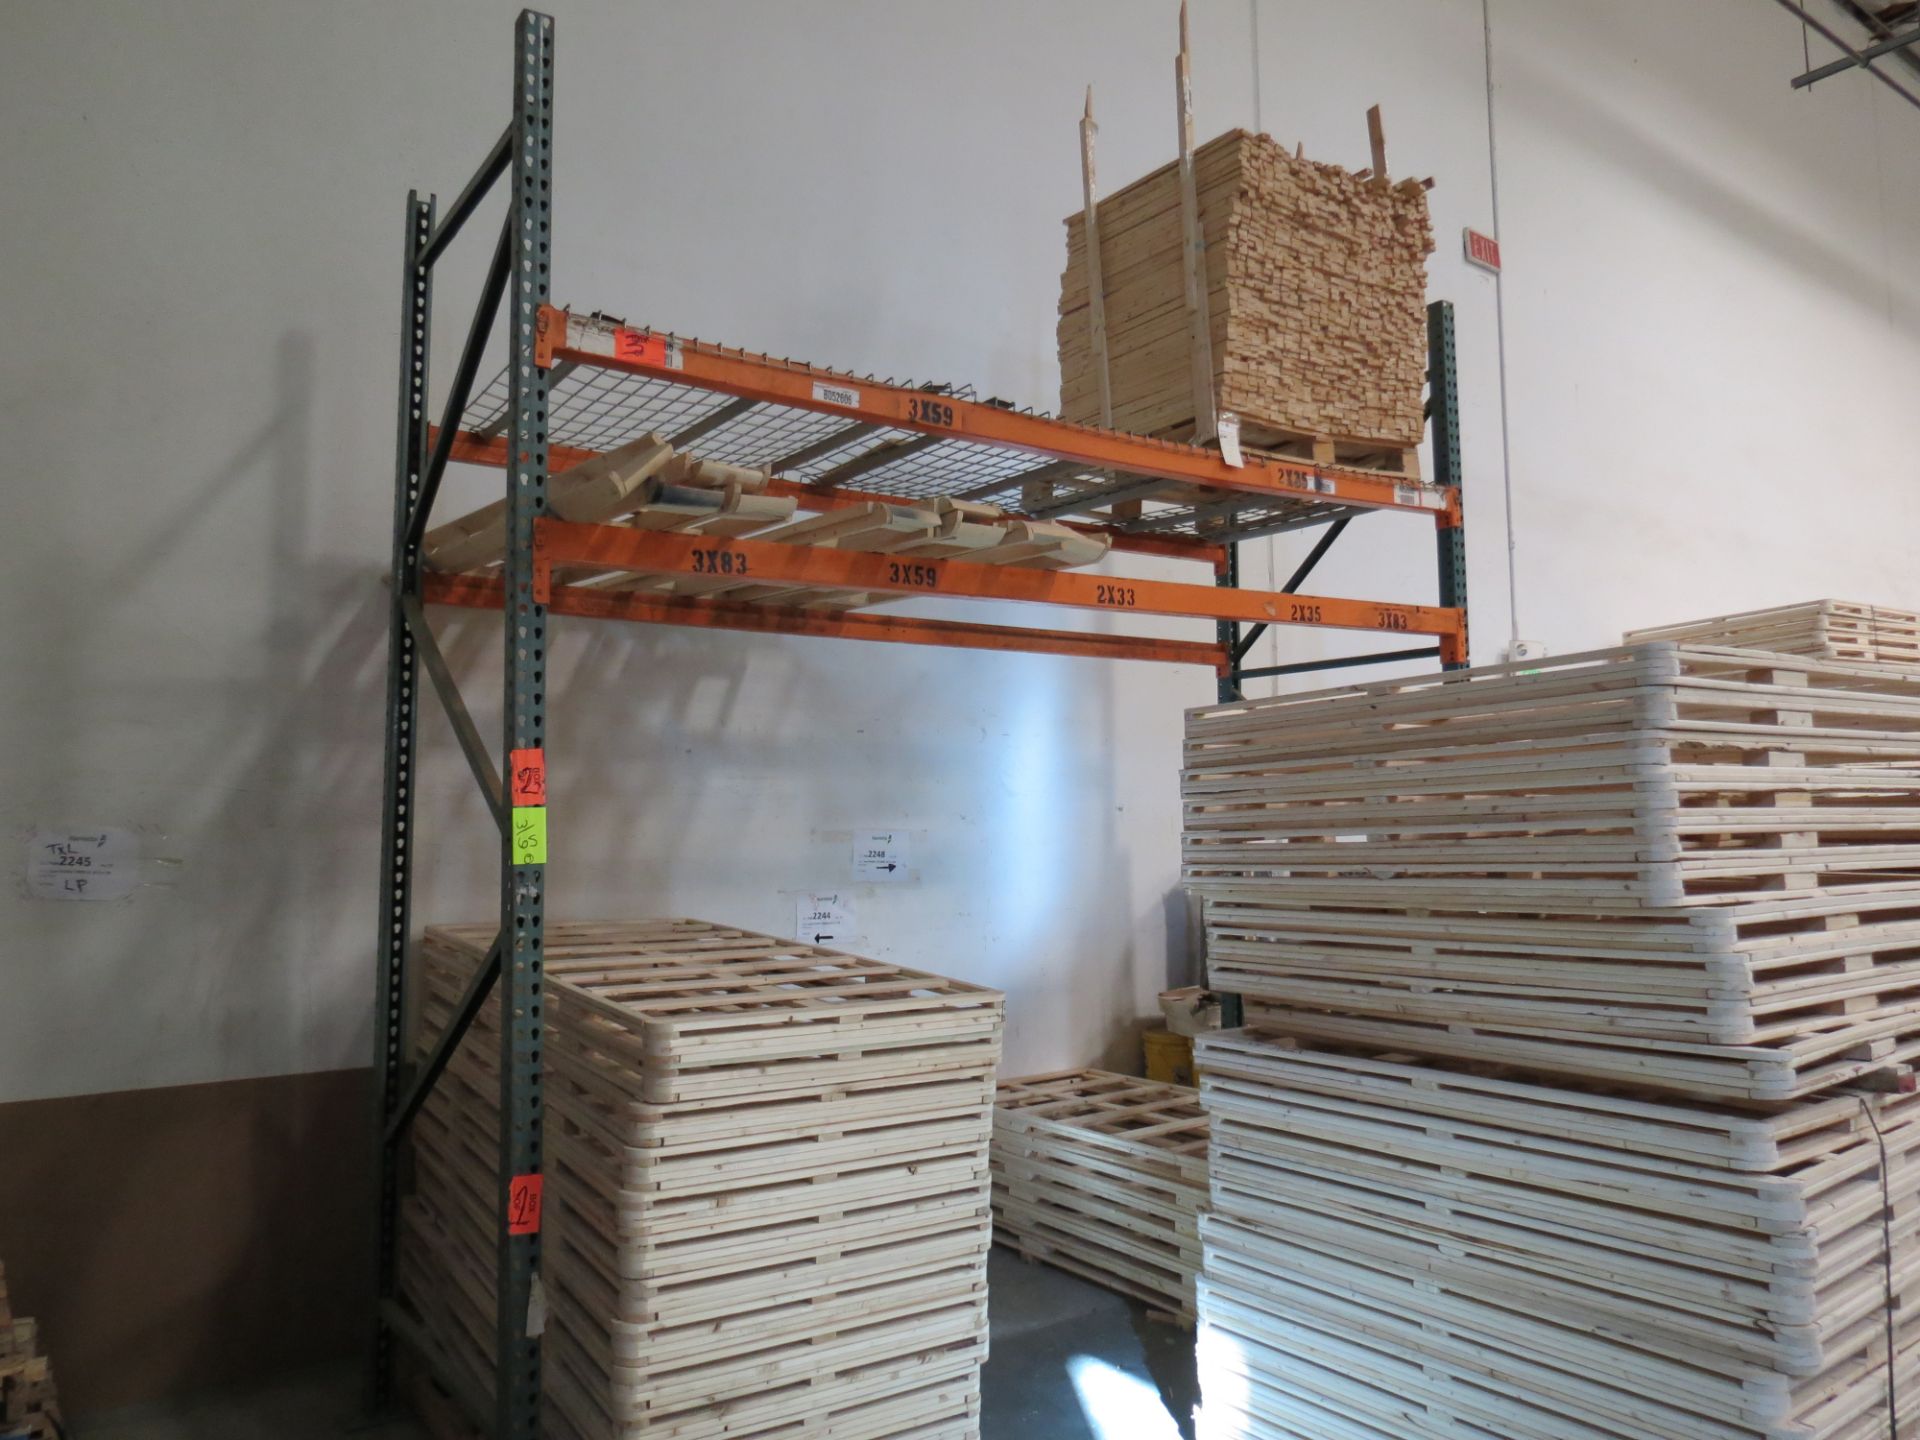 Sections of Pallet Racking Orange / Green - Image 4 of 4